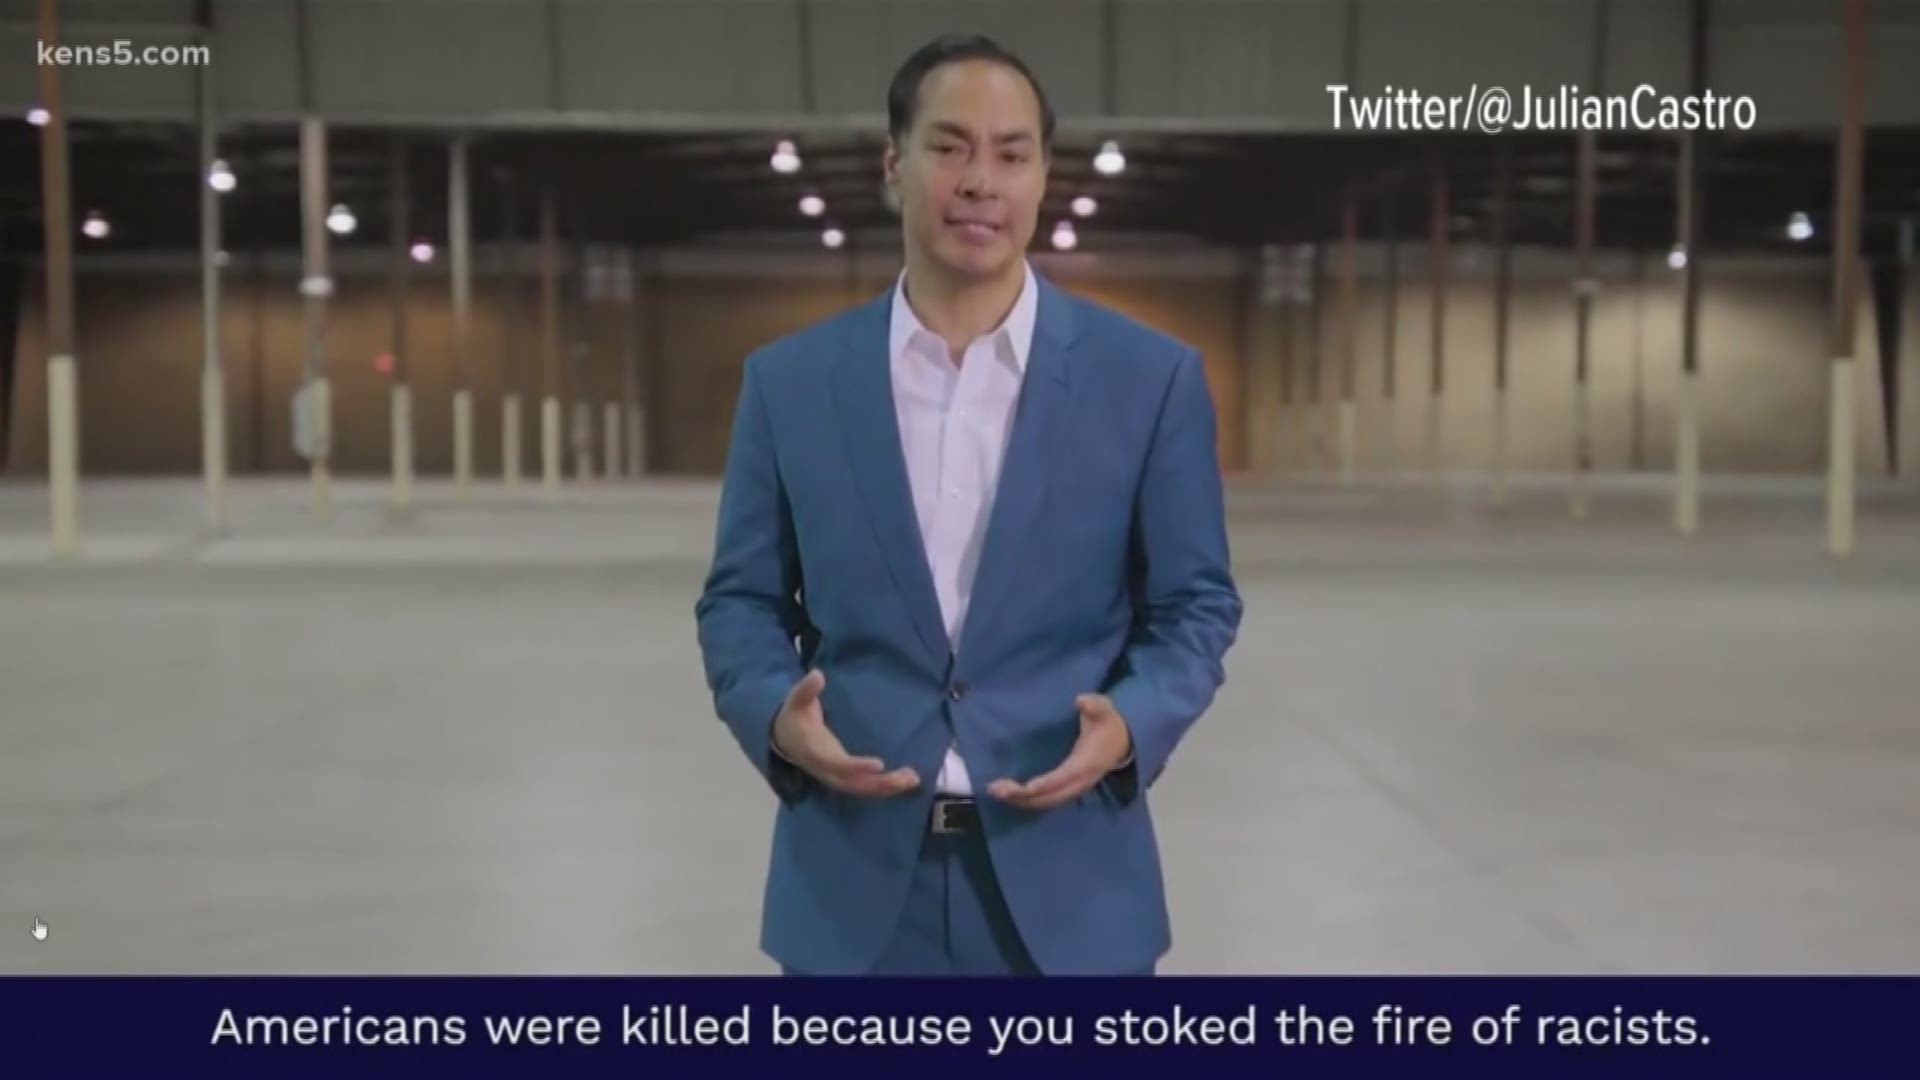 San Antonio presidential candidate Julian Castro unleashed a new attack ad. Castro is making sure the president himself sees the ad. His campaign spent nearly $3,000 to run the ad in New Jersey Wednesday. That's where President Trump is spending time at his private golf club.